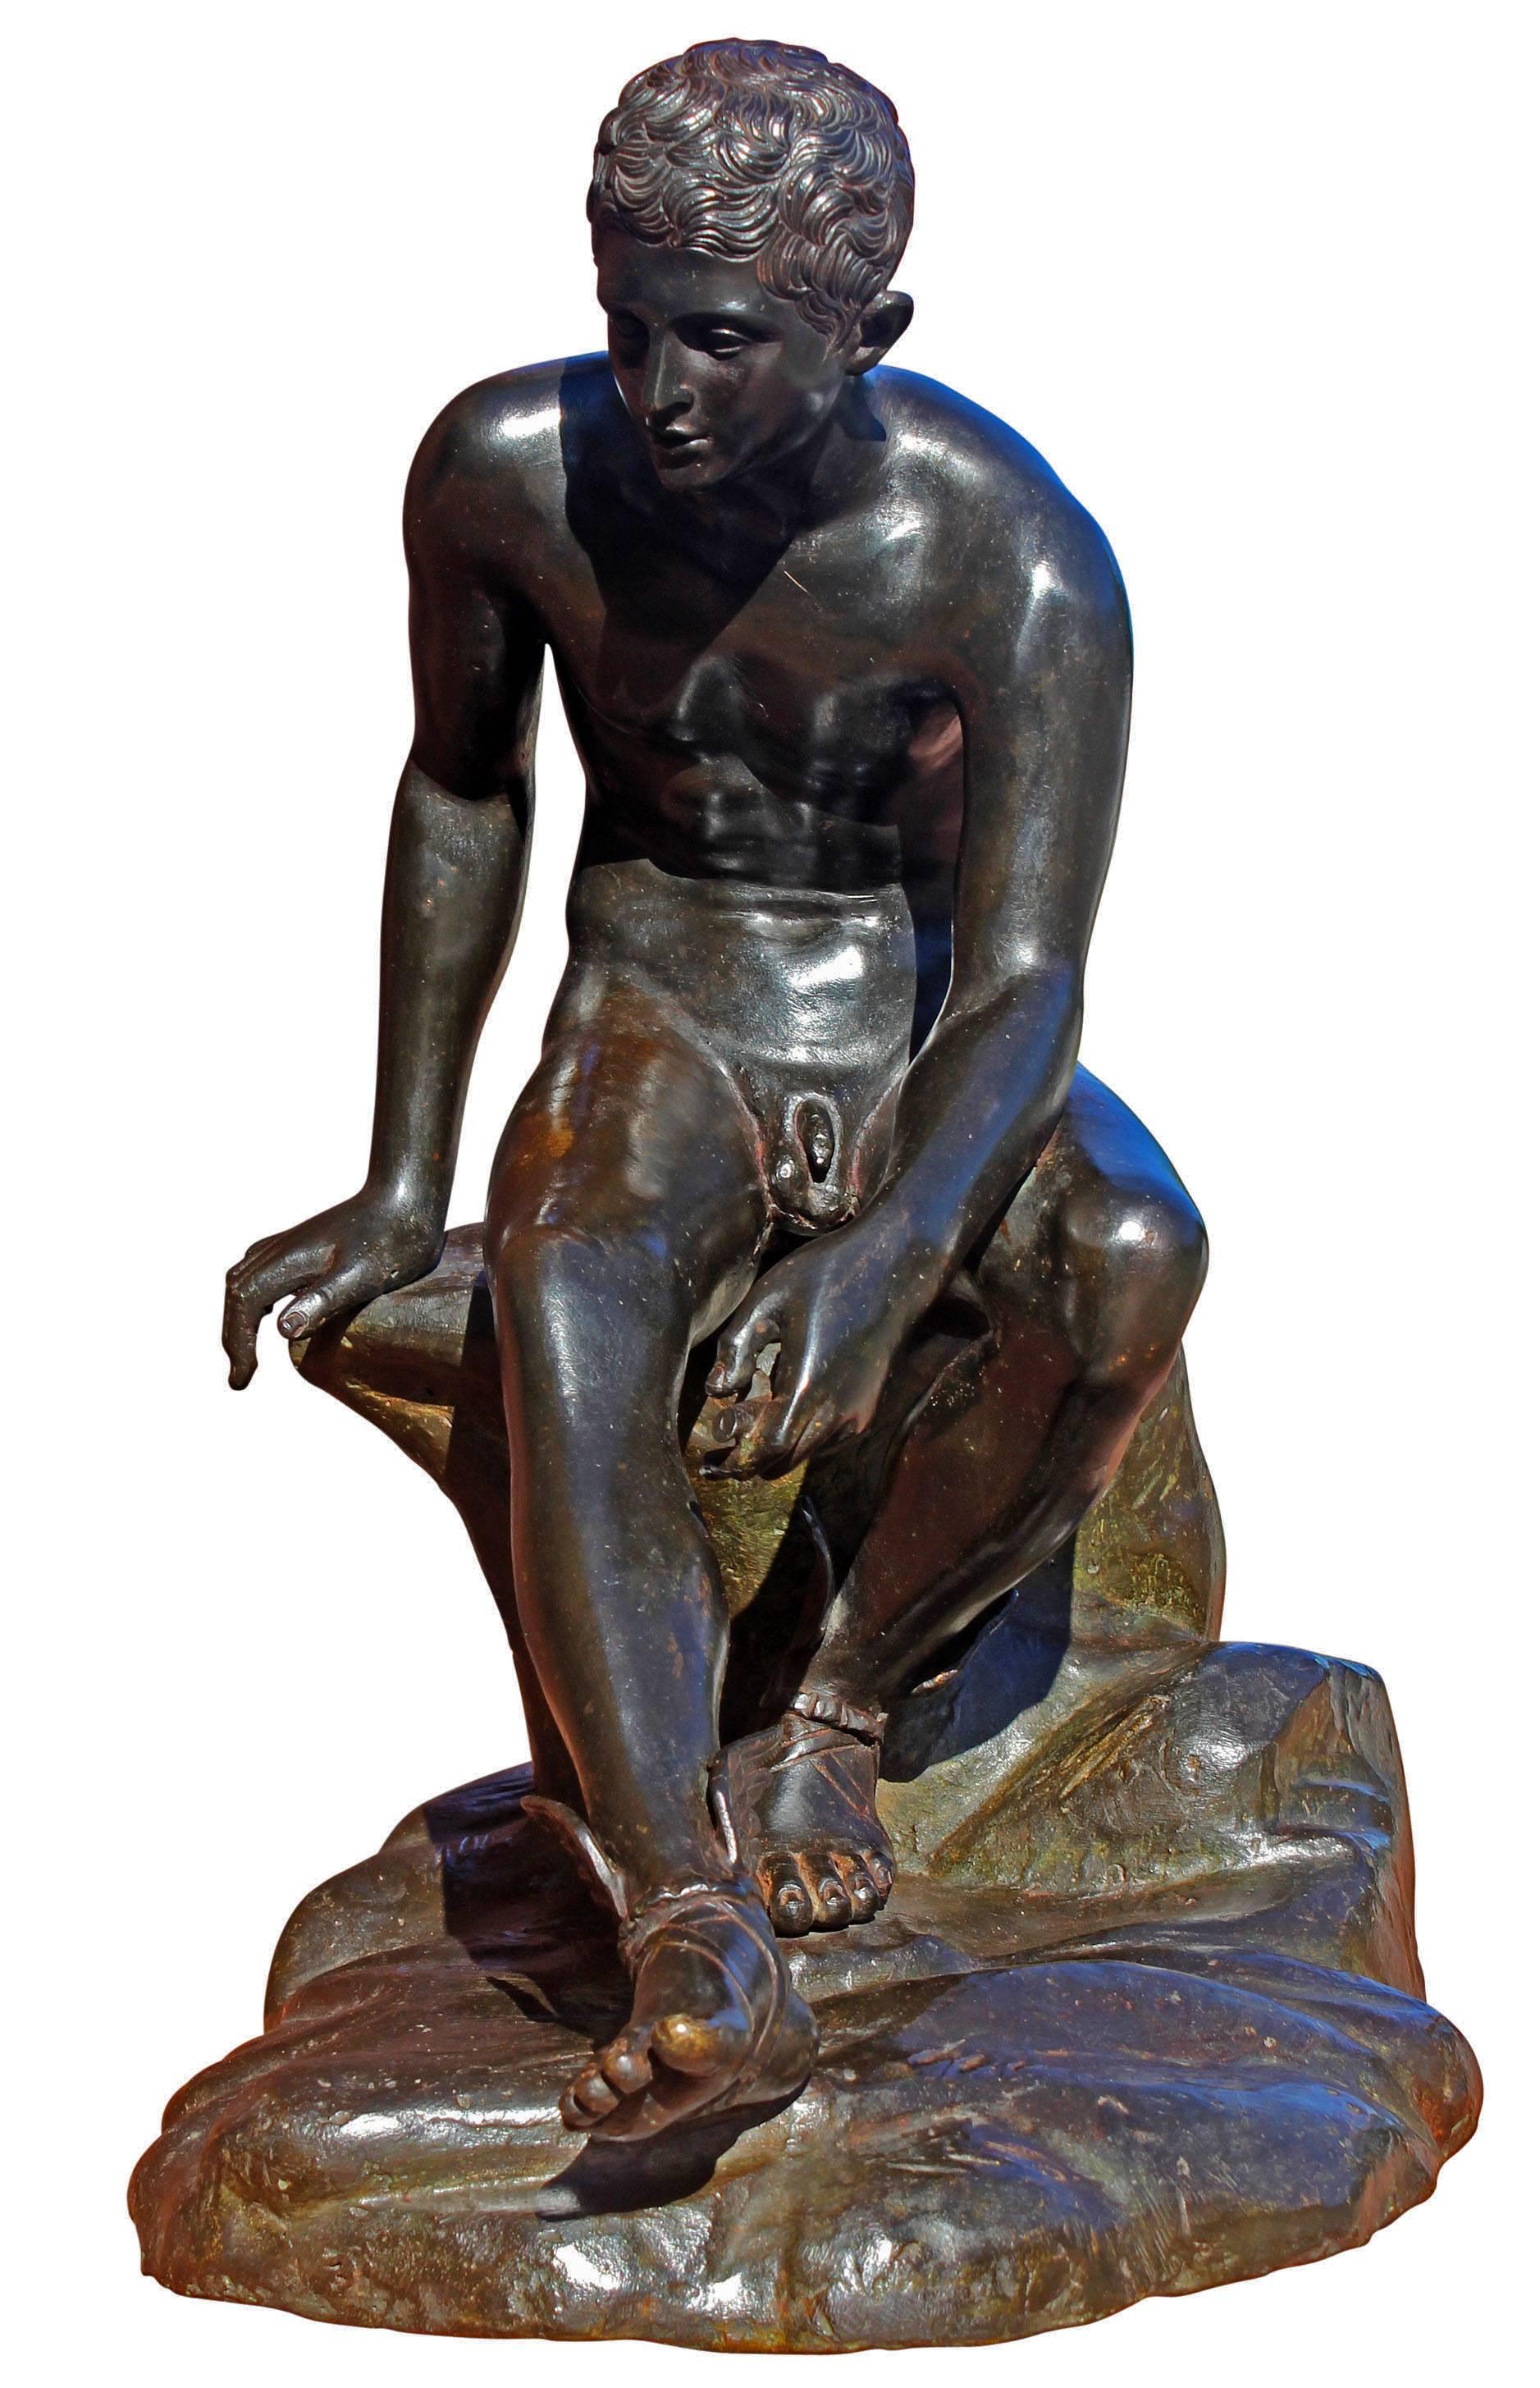 Italian grand tour bronze of Hermes or Mercury seated, late 19th century. Large 18 1/2" high. After the antique from villa of Papyri, Herculaneum.